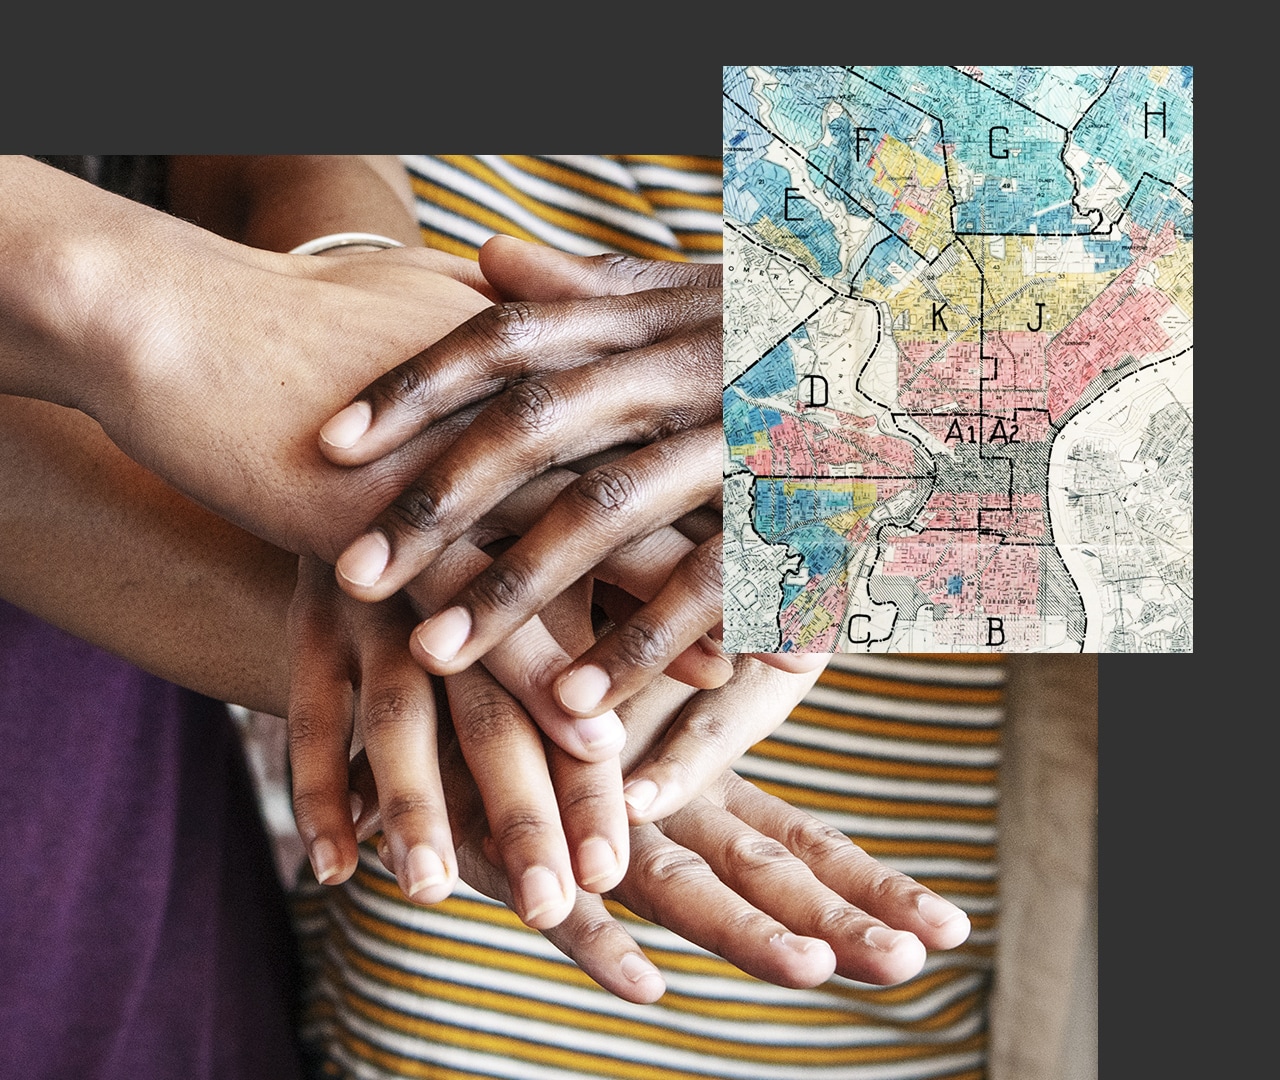 Closeup image of four hands clasped together next to an inset image of a street map with letters A-G dividing the map